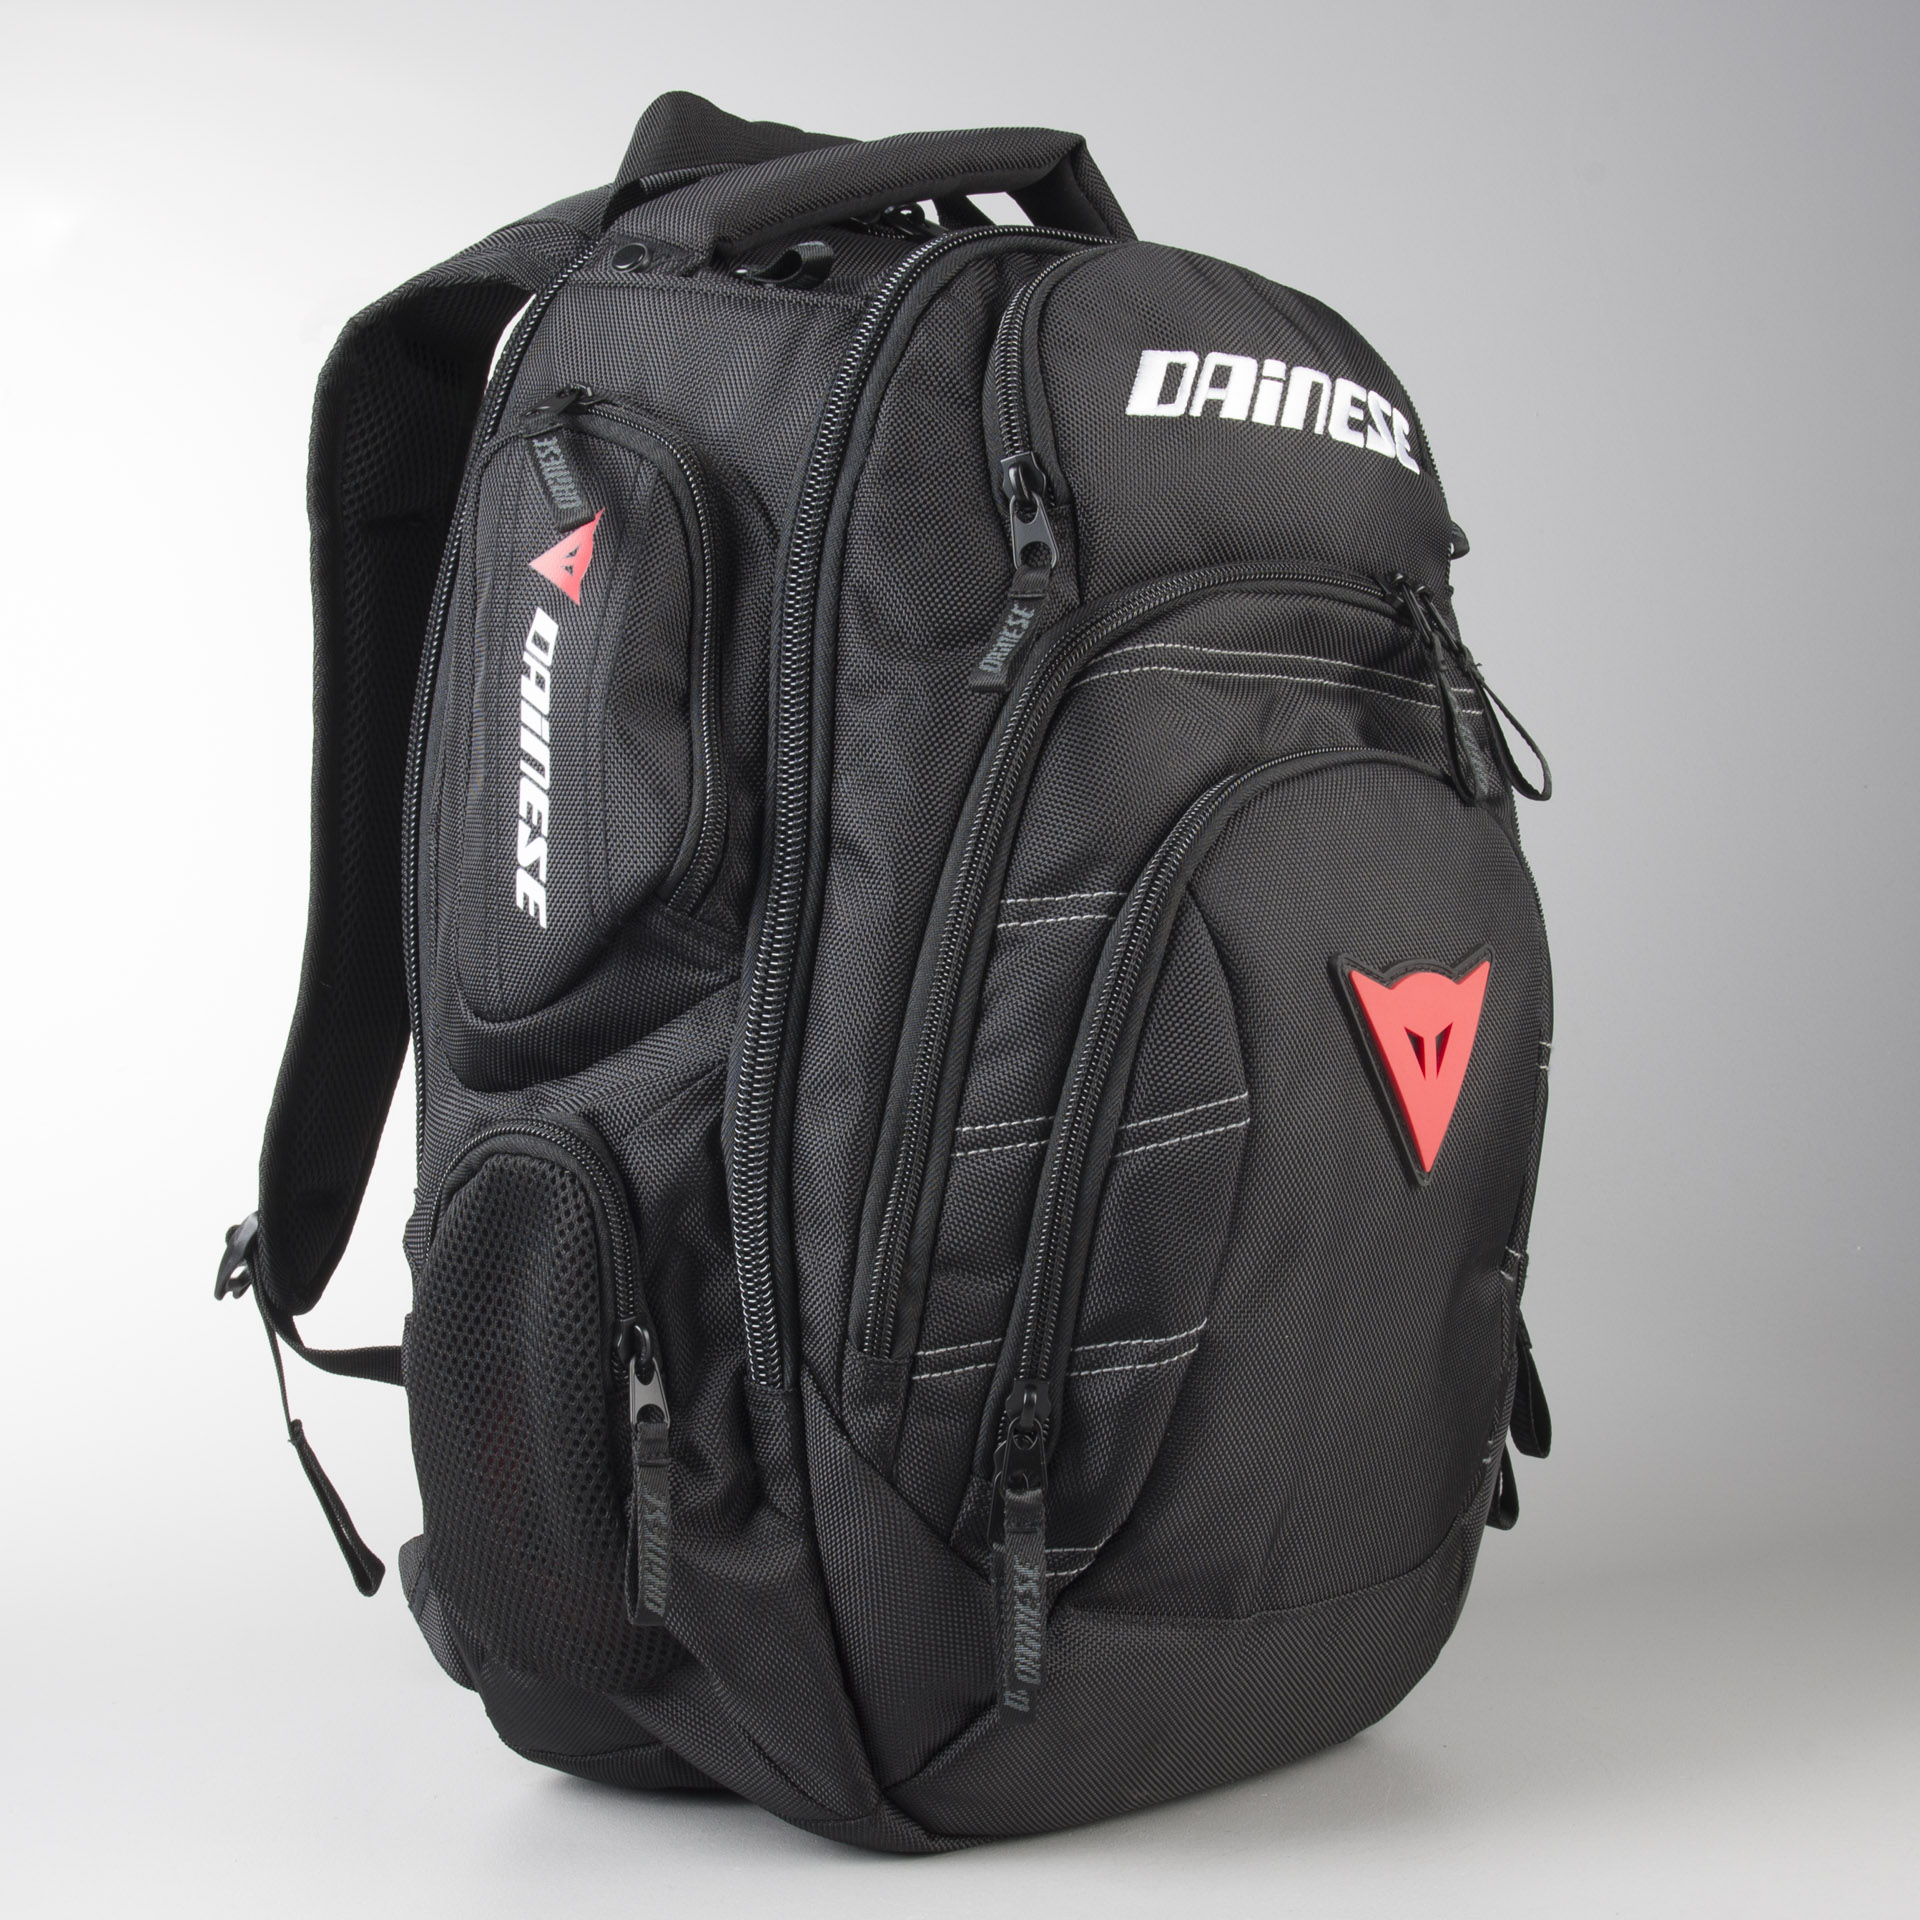 Dainese D-Gambit Backpack - Buy now